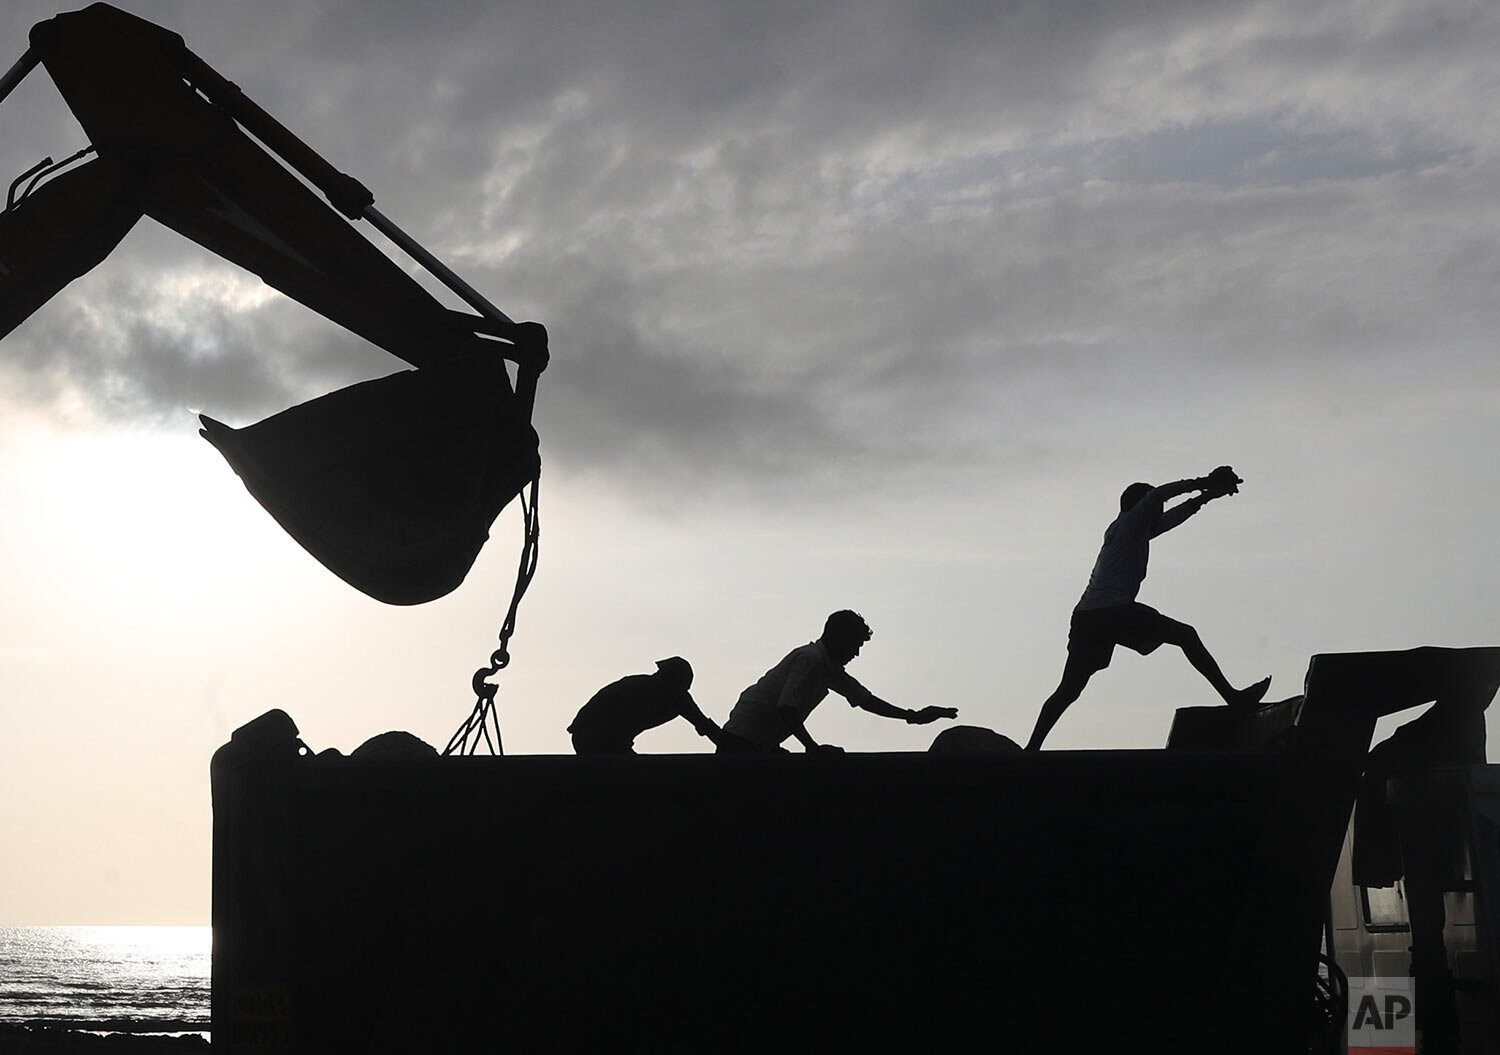  Workers use machinery at a coastal road project construction site in Mumbai, India, Thursday, Aug. 26, 2021. (AP Photo/Rafiq Maqbool) 